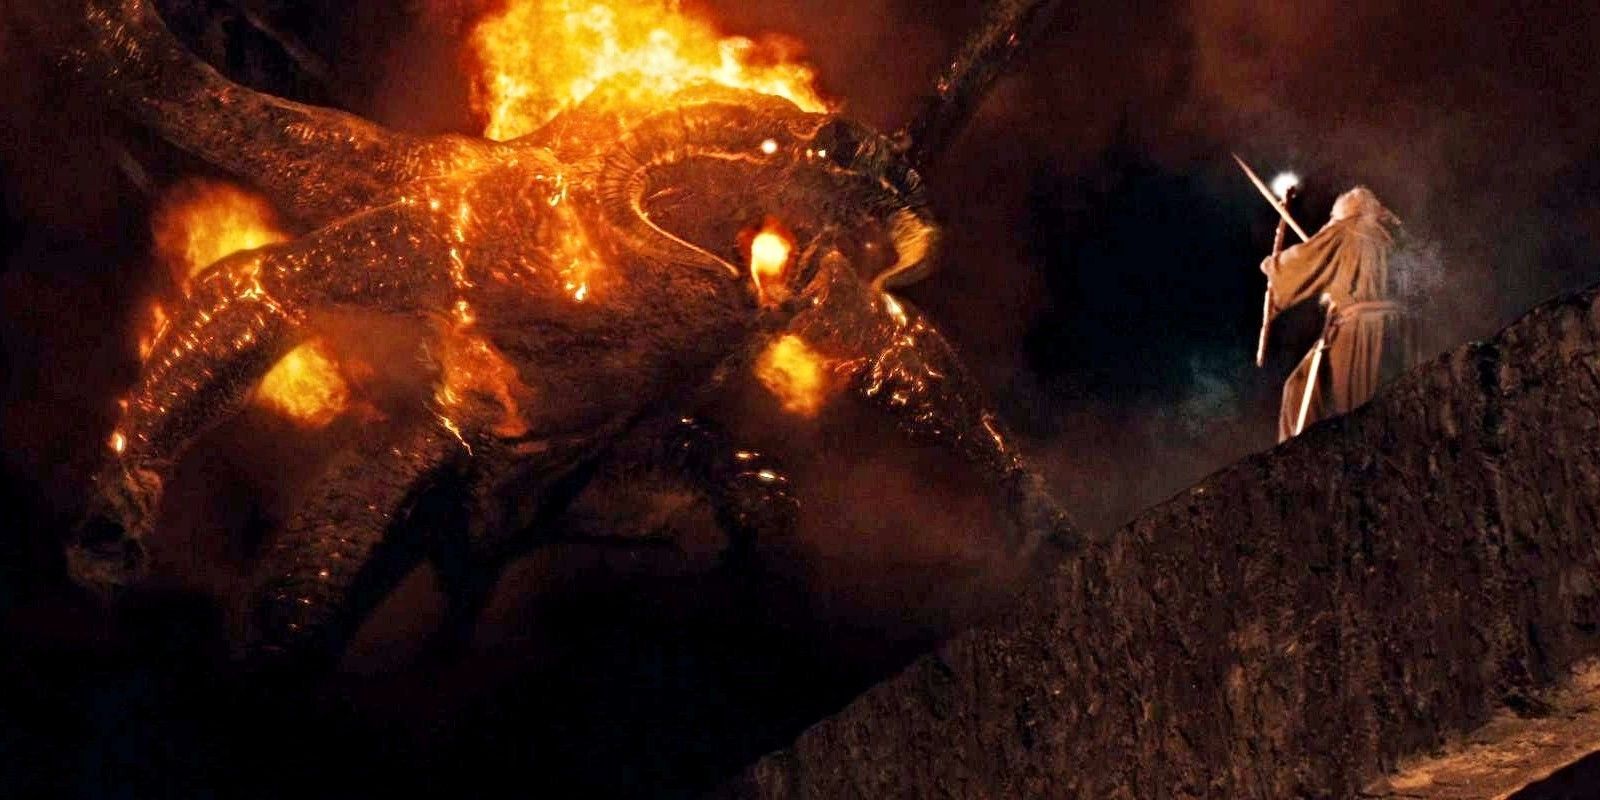 Gandalf and a Balrog battle in The Lord of the Rings